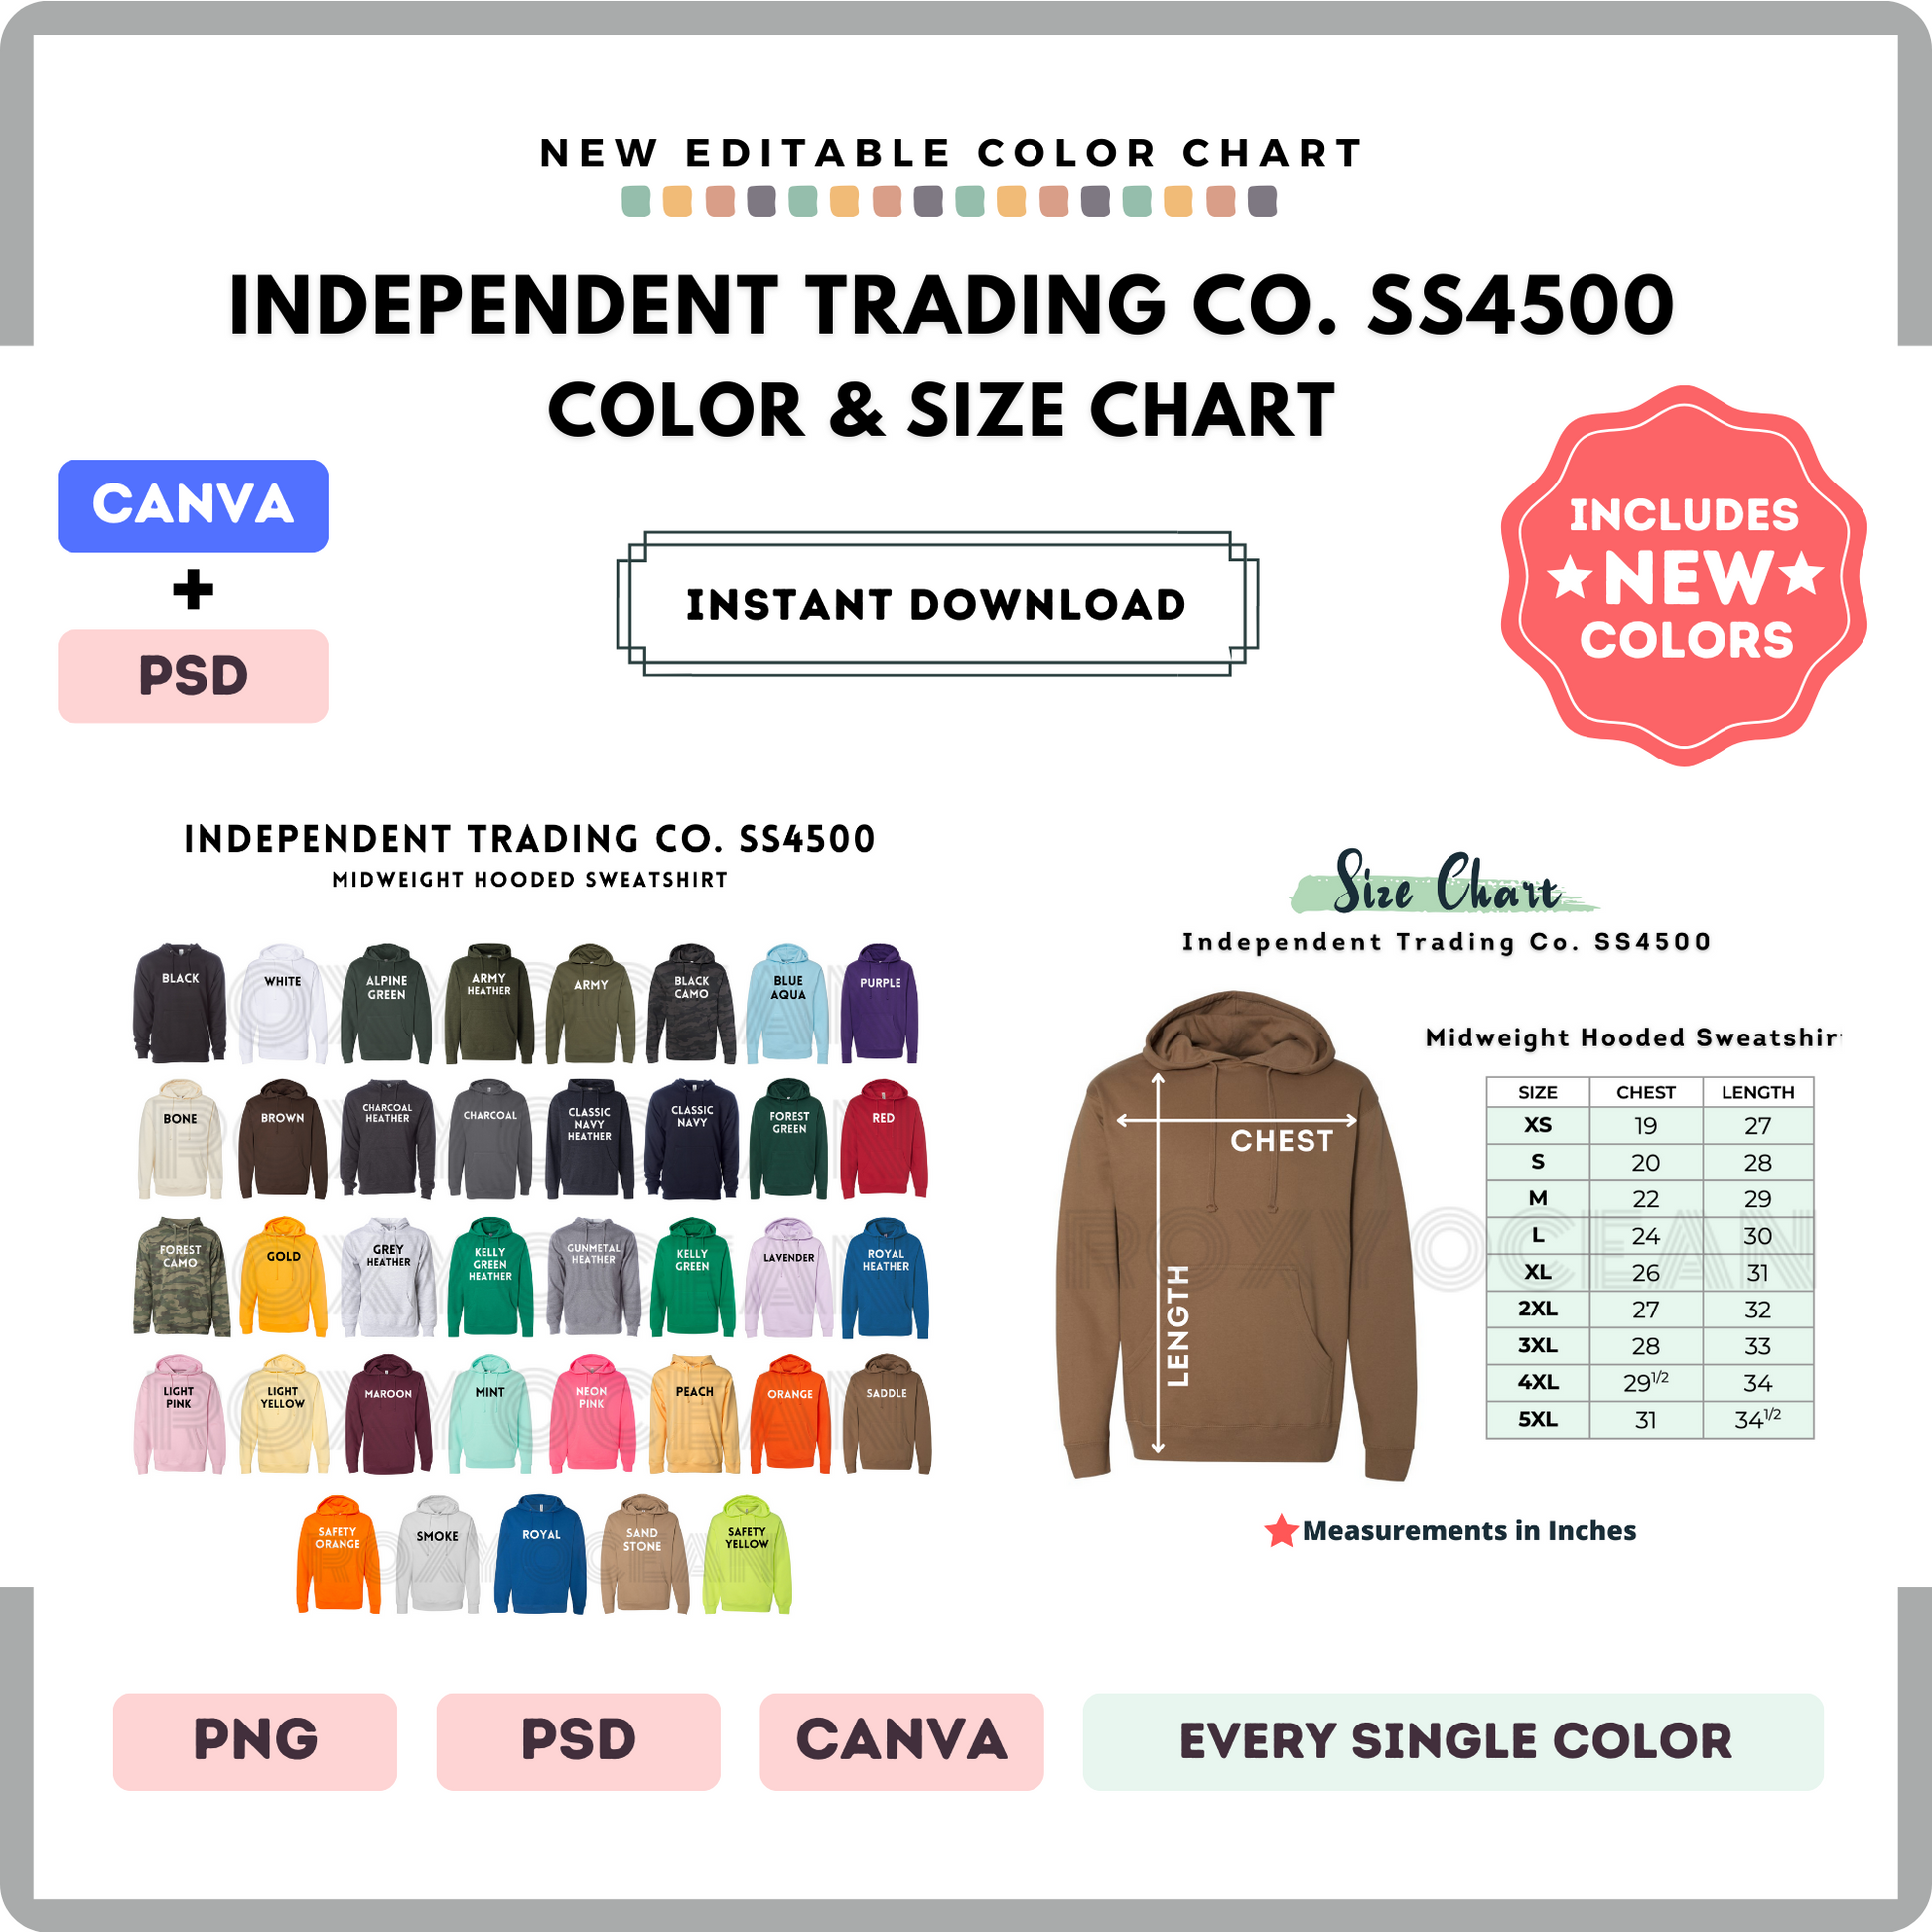 Independent Trading Co. SS4500 Color and Size Chart